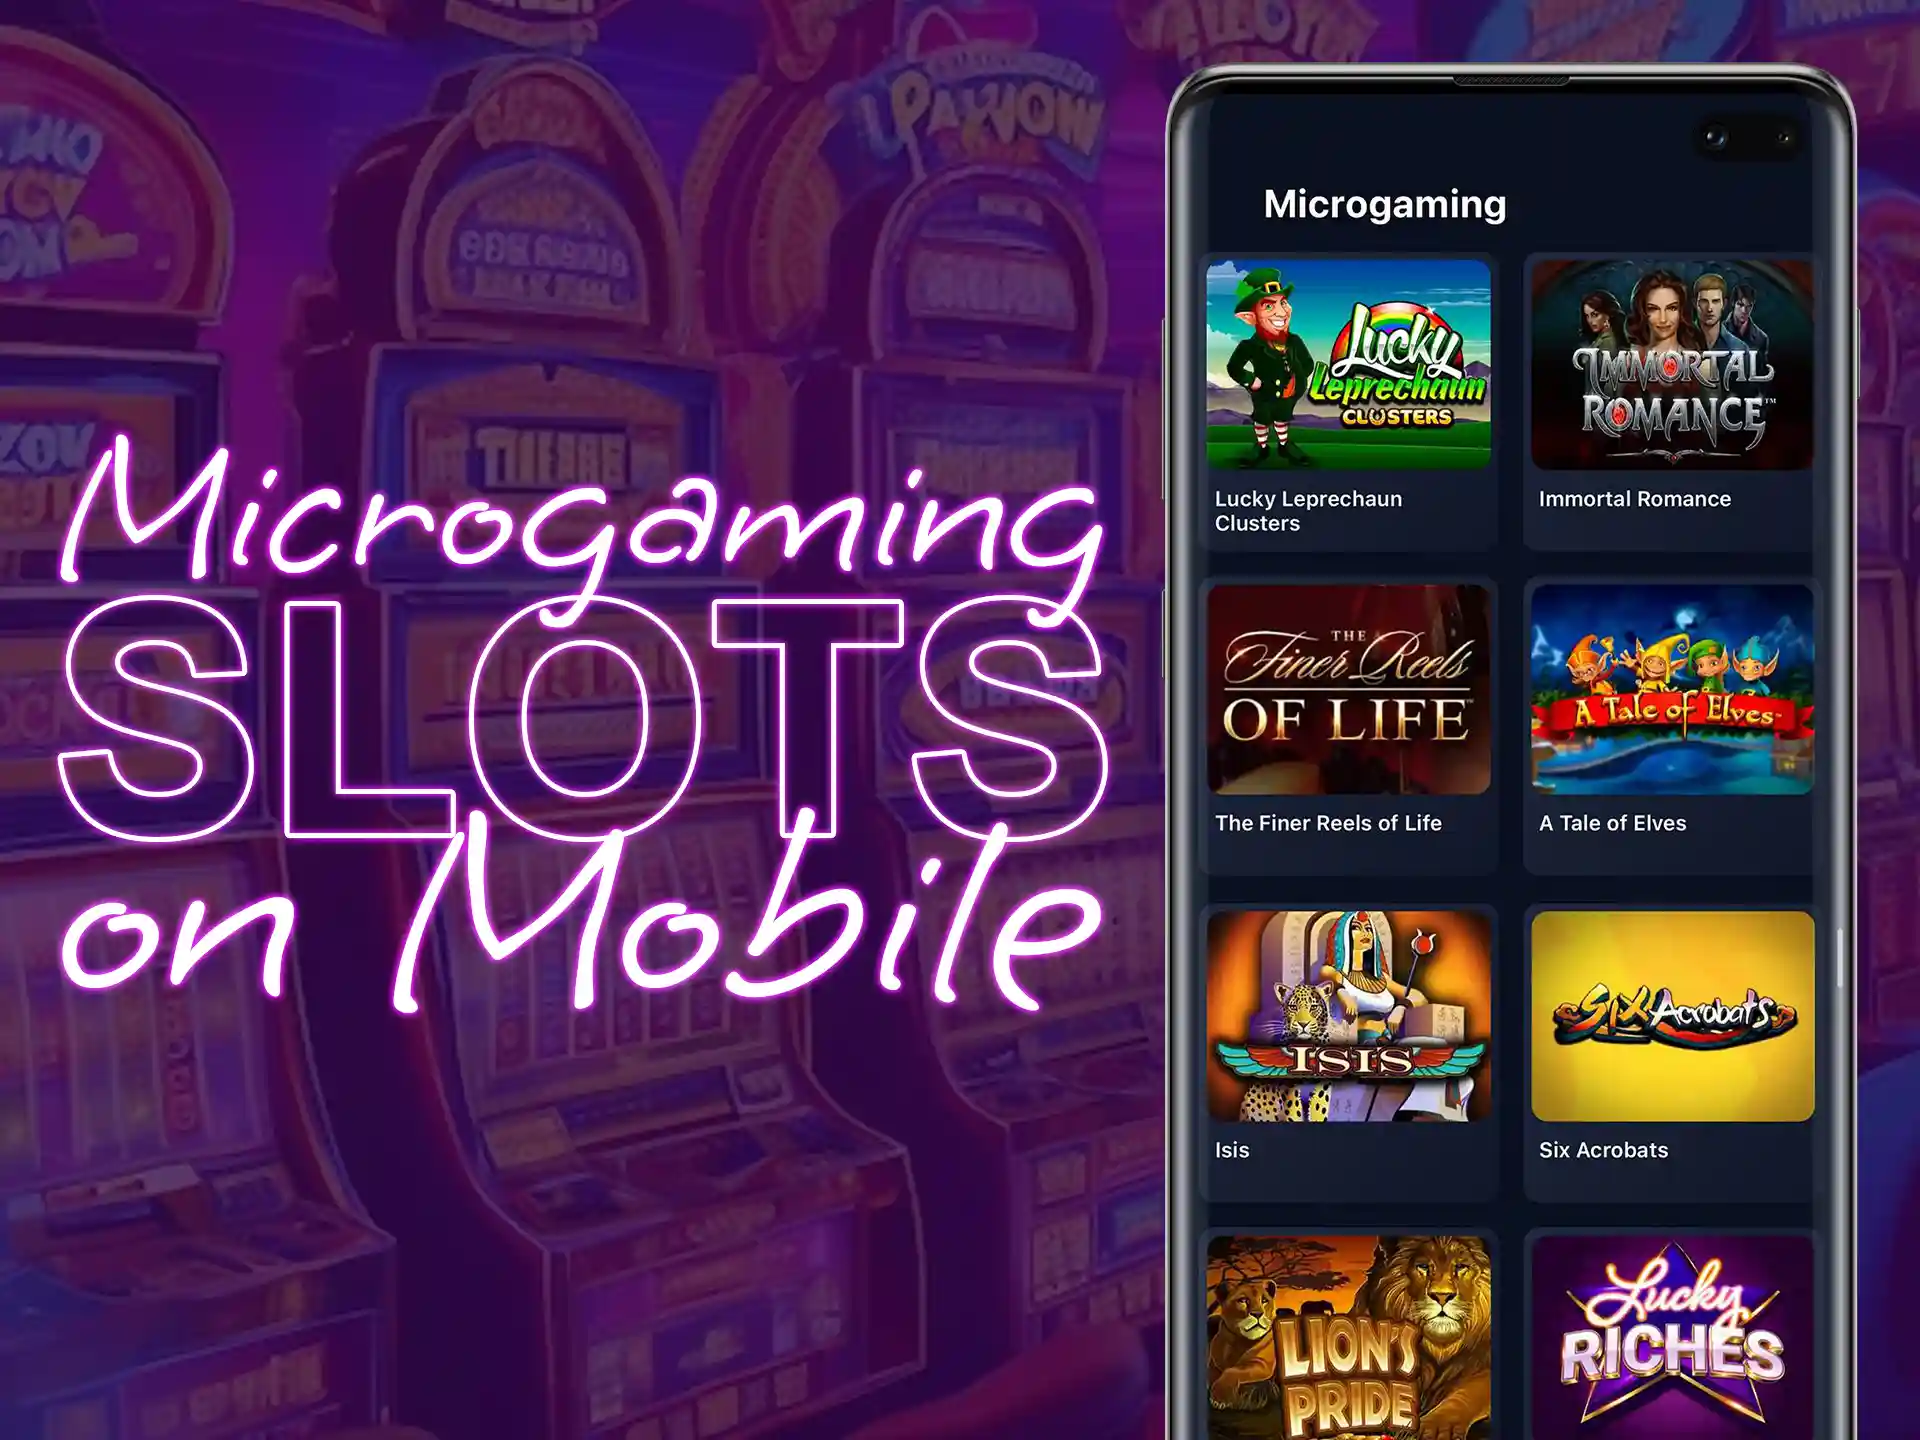 Microgaming slots are available for mobile devices.